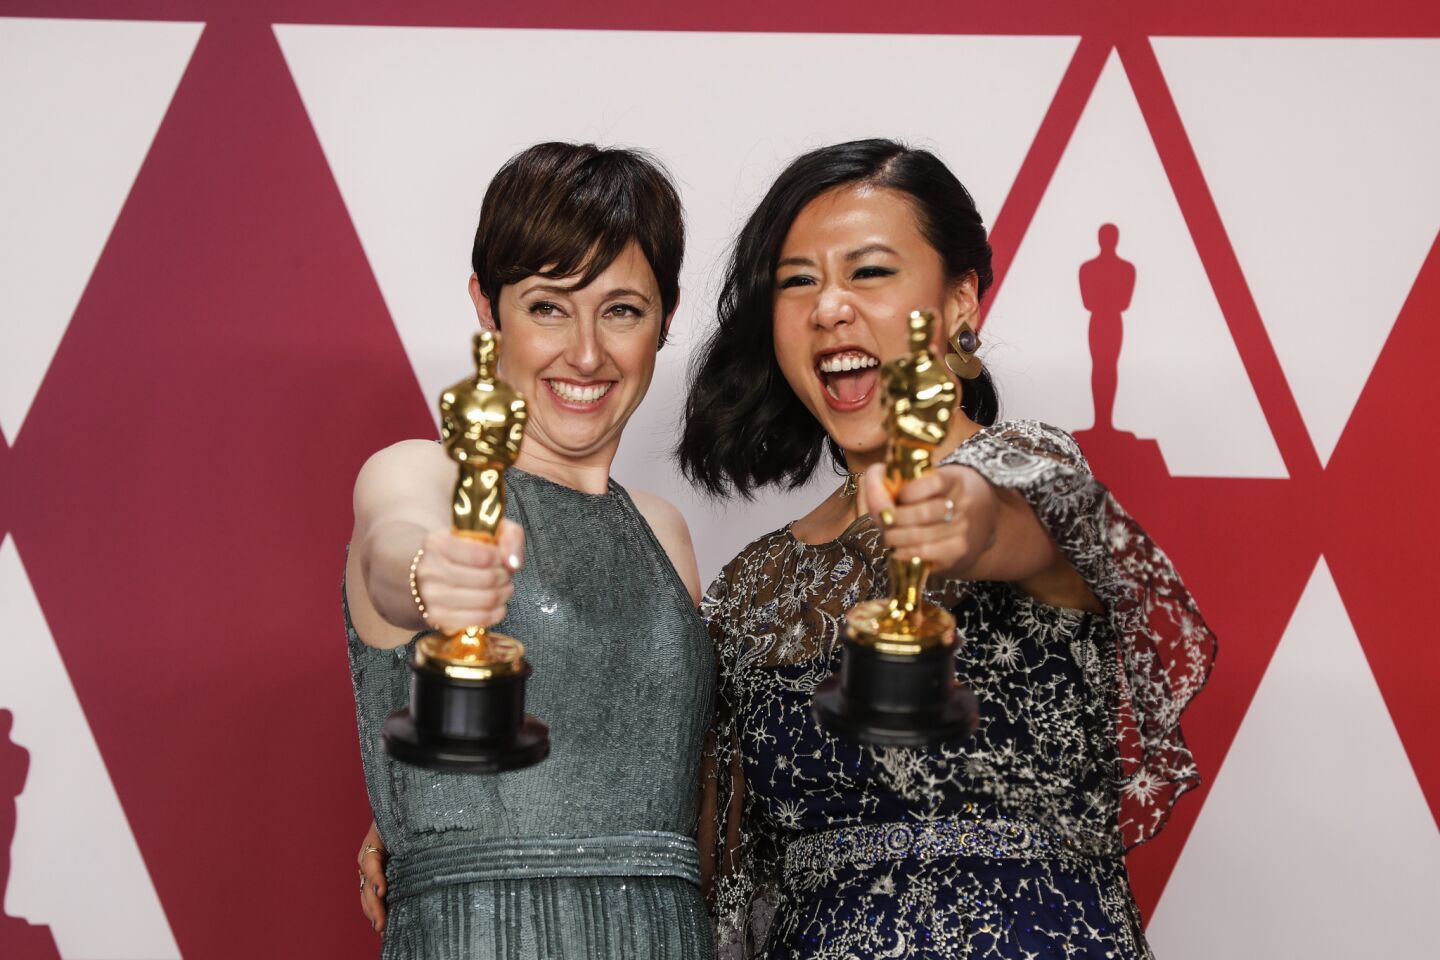 Becky Neiman-Cobb, left, and Domee Shi, winners of the animated short film Oscar for "Bao."